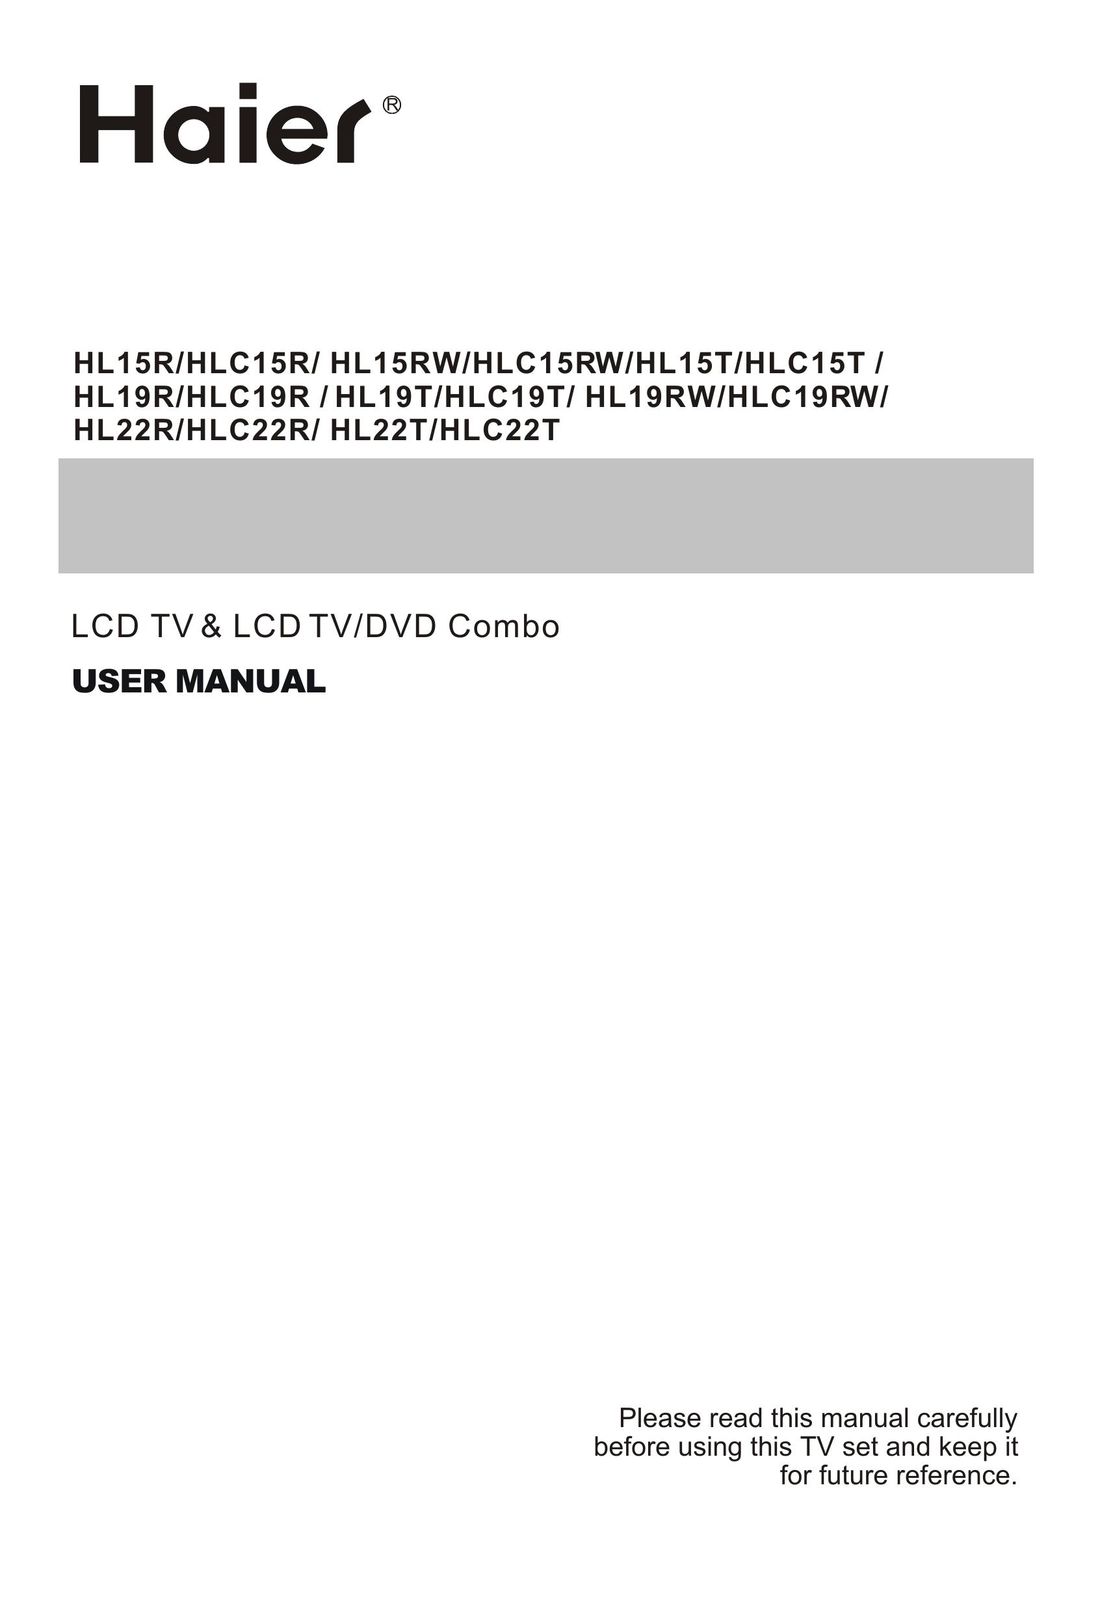 Haier HL22T Flat Panel Television User Manual